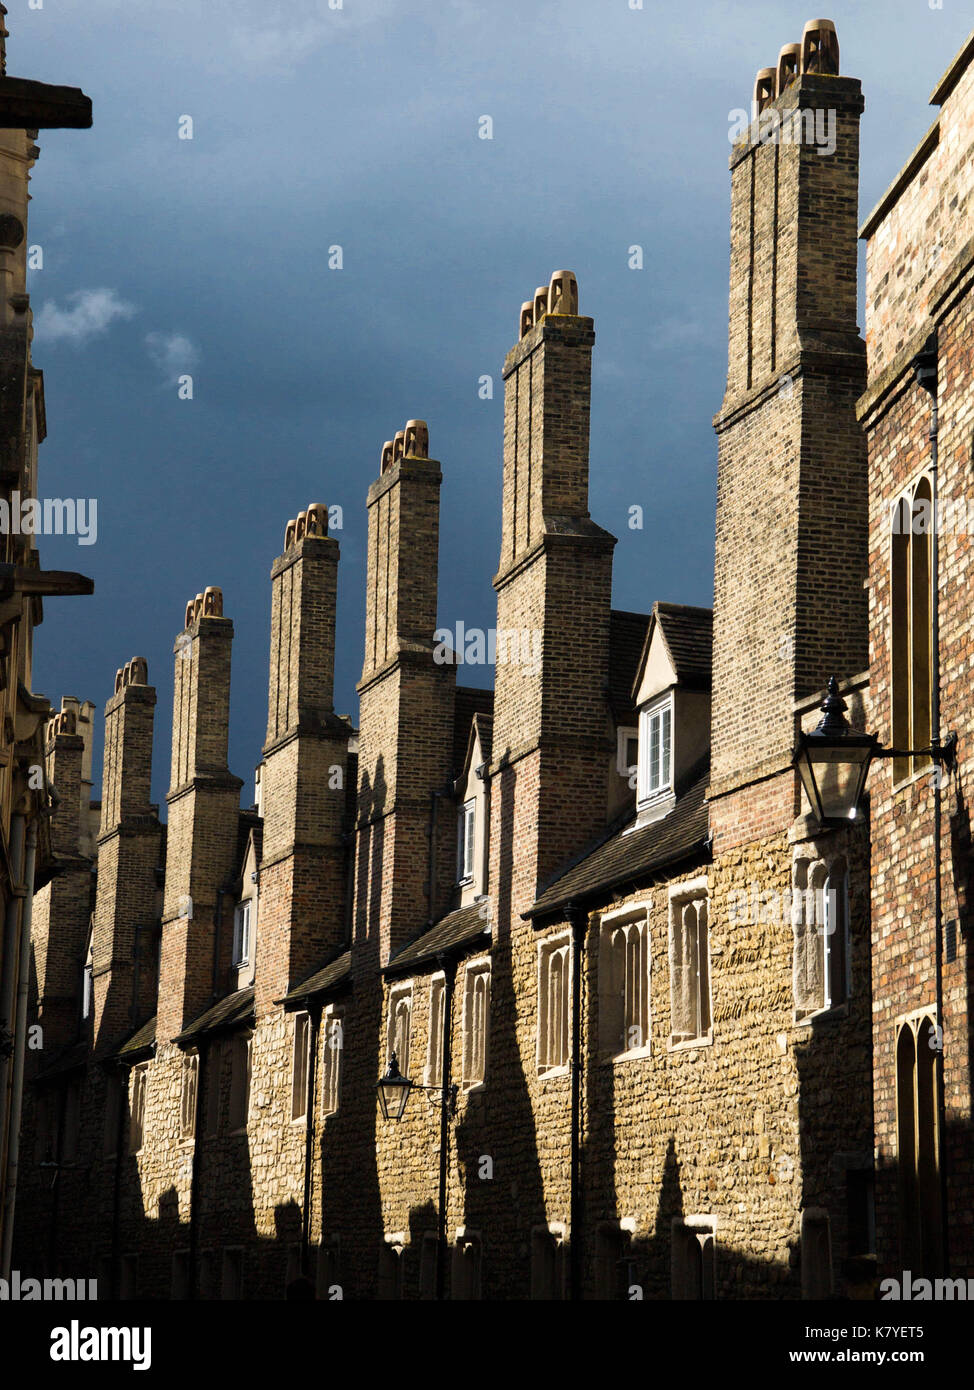 Before the Storm: Identical, Old Cambridge Chimneys Stand in Bright Sunshine as Dark Clouds Approach Stock Photo